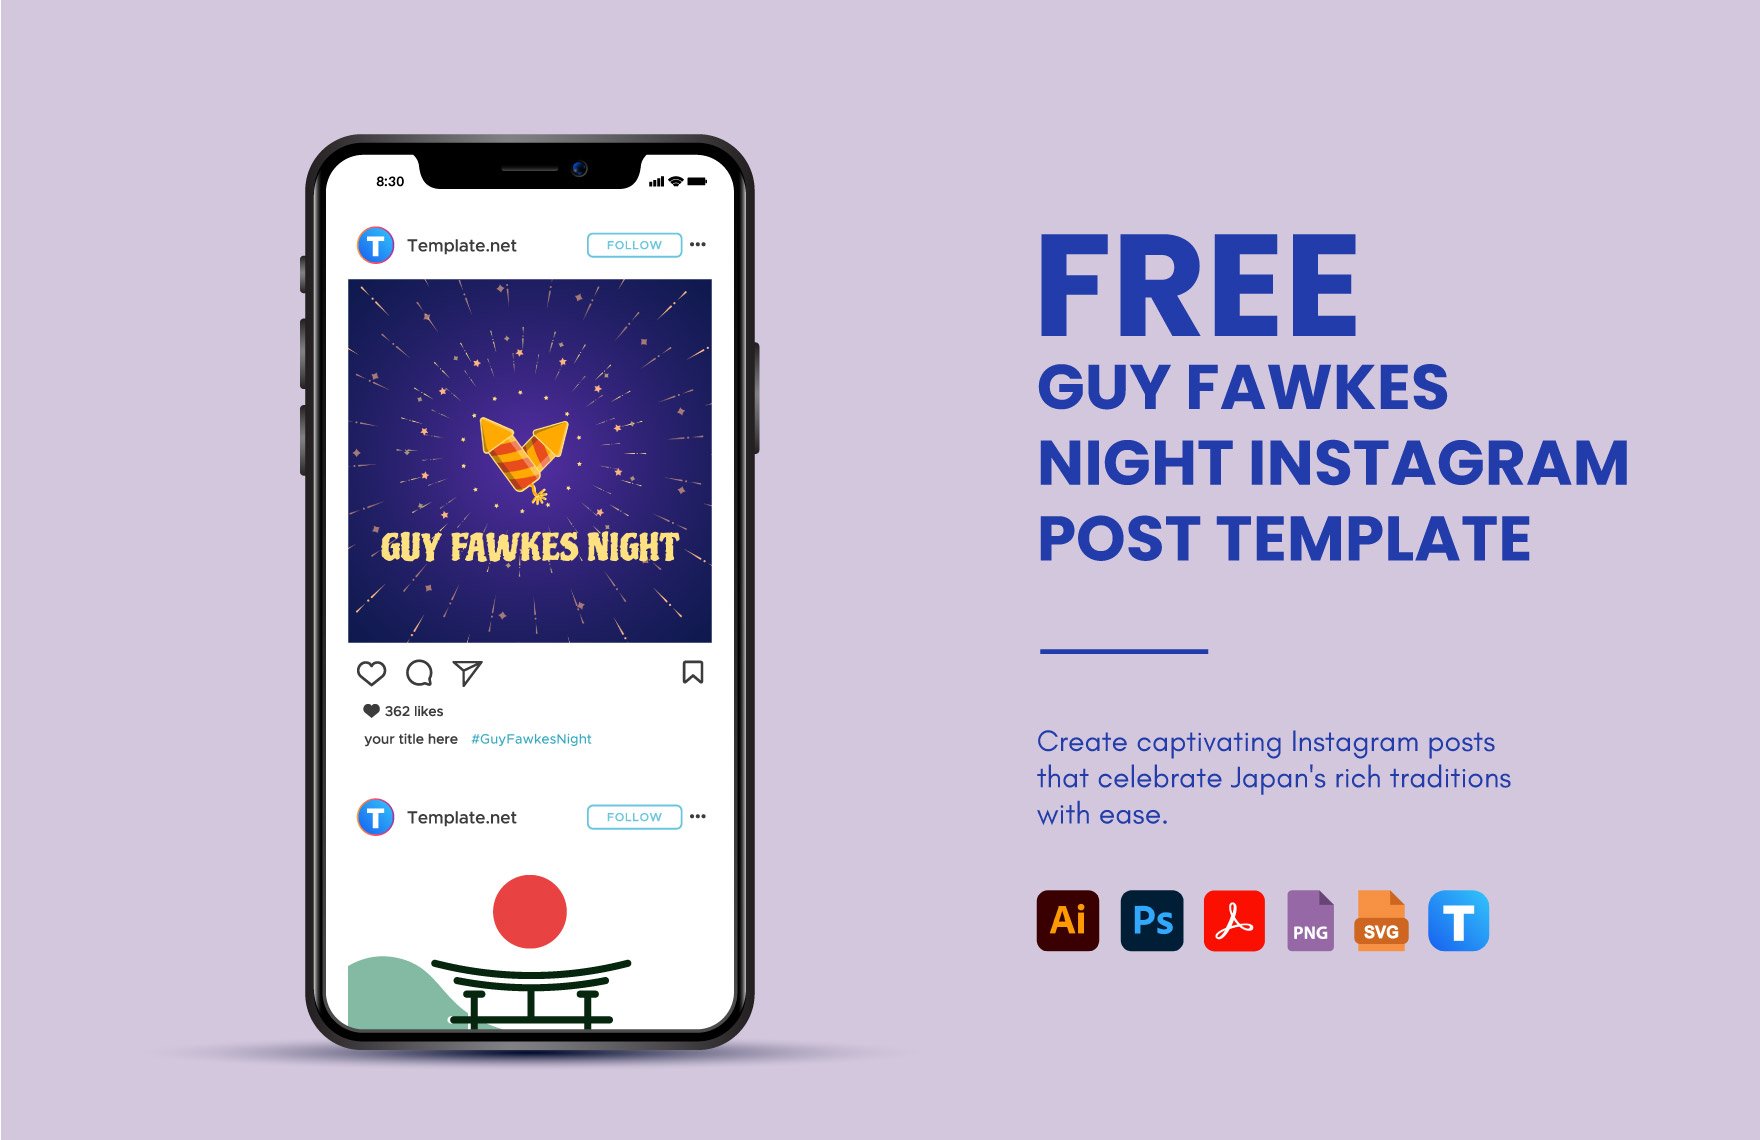 Free Guy Fawkes Night Instagram Post Template in PDF, Illustrator, PSD, SVG, PNG